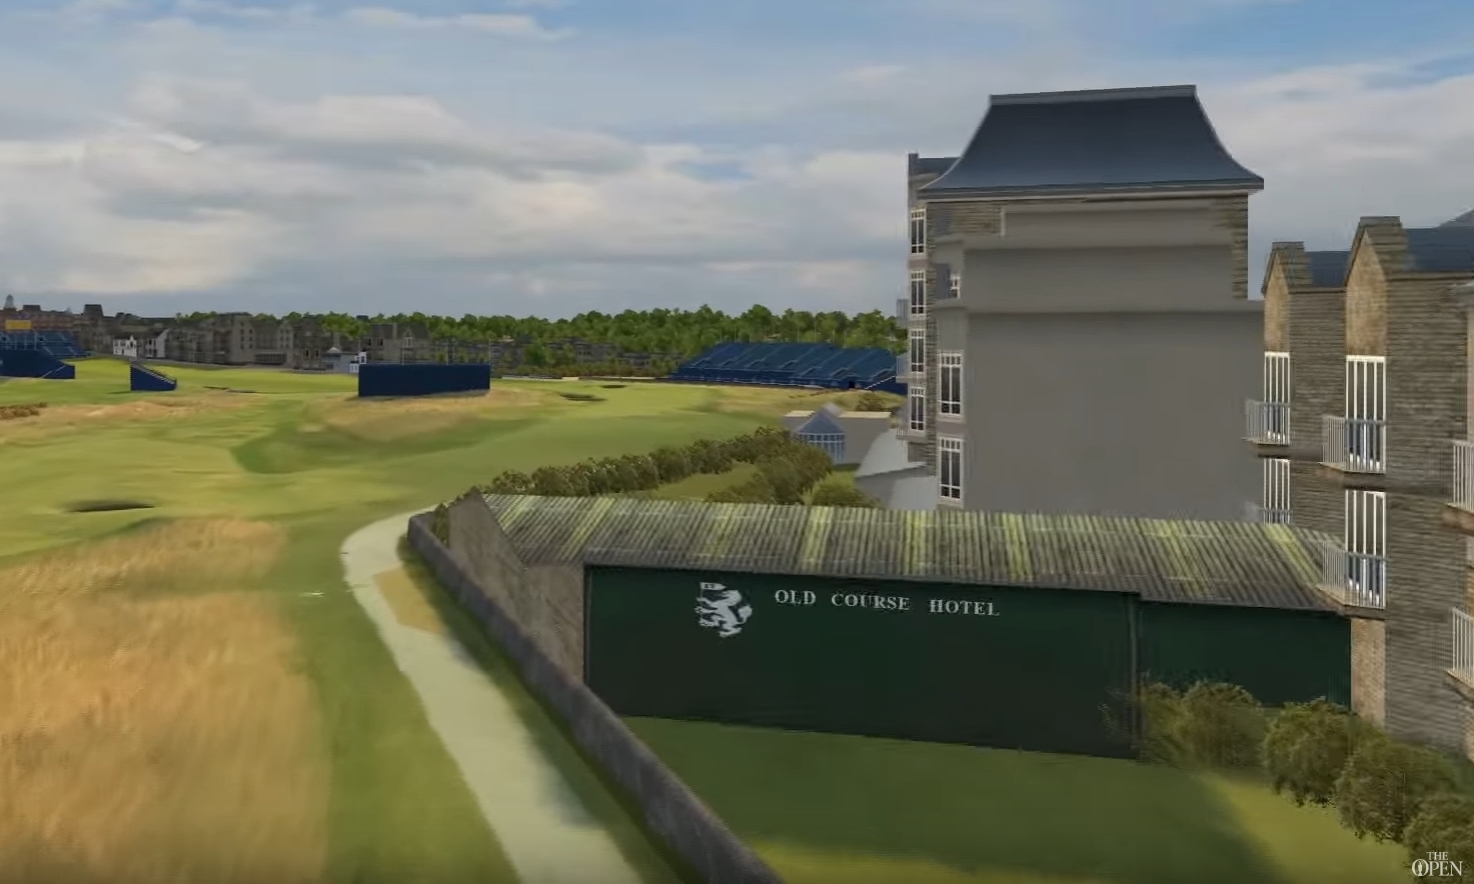 A computer-generated image showing how golfers need to aim over hotel outbuildings to find the fairway.